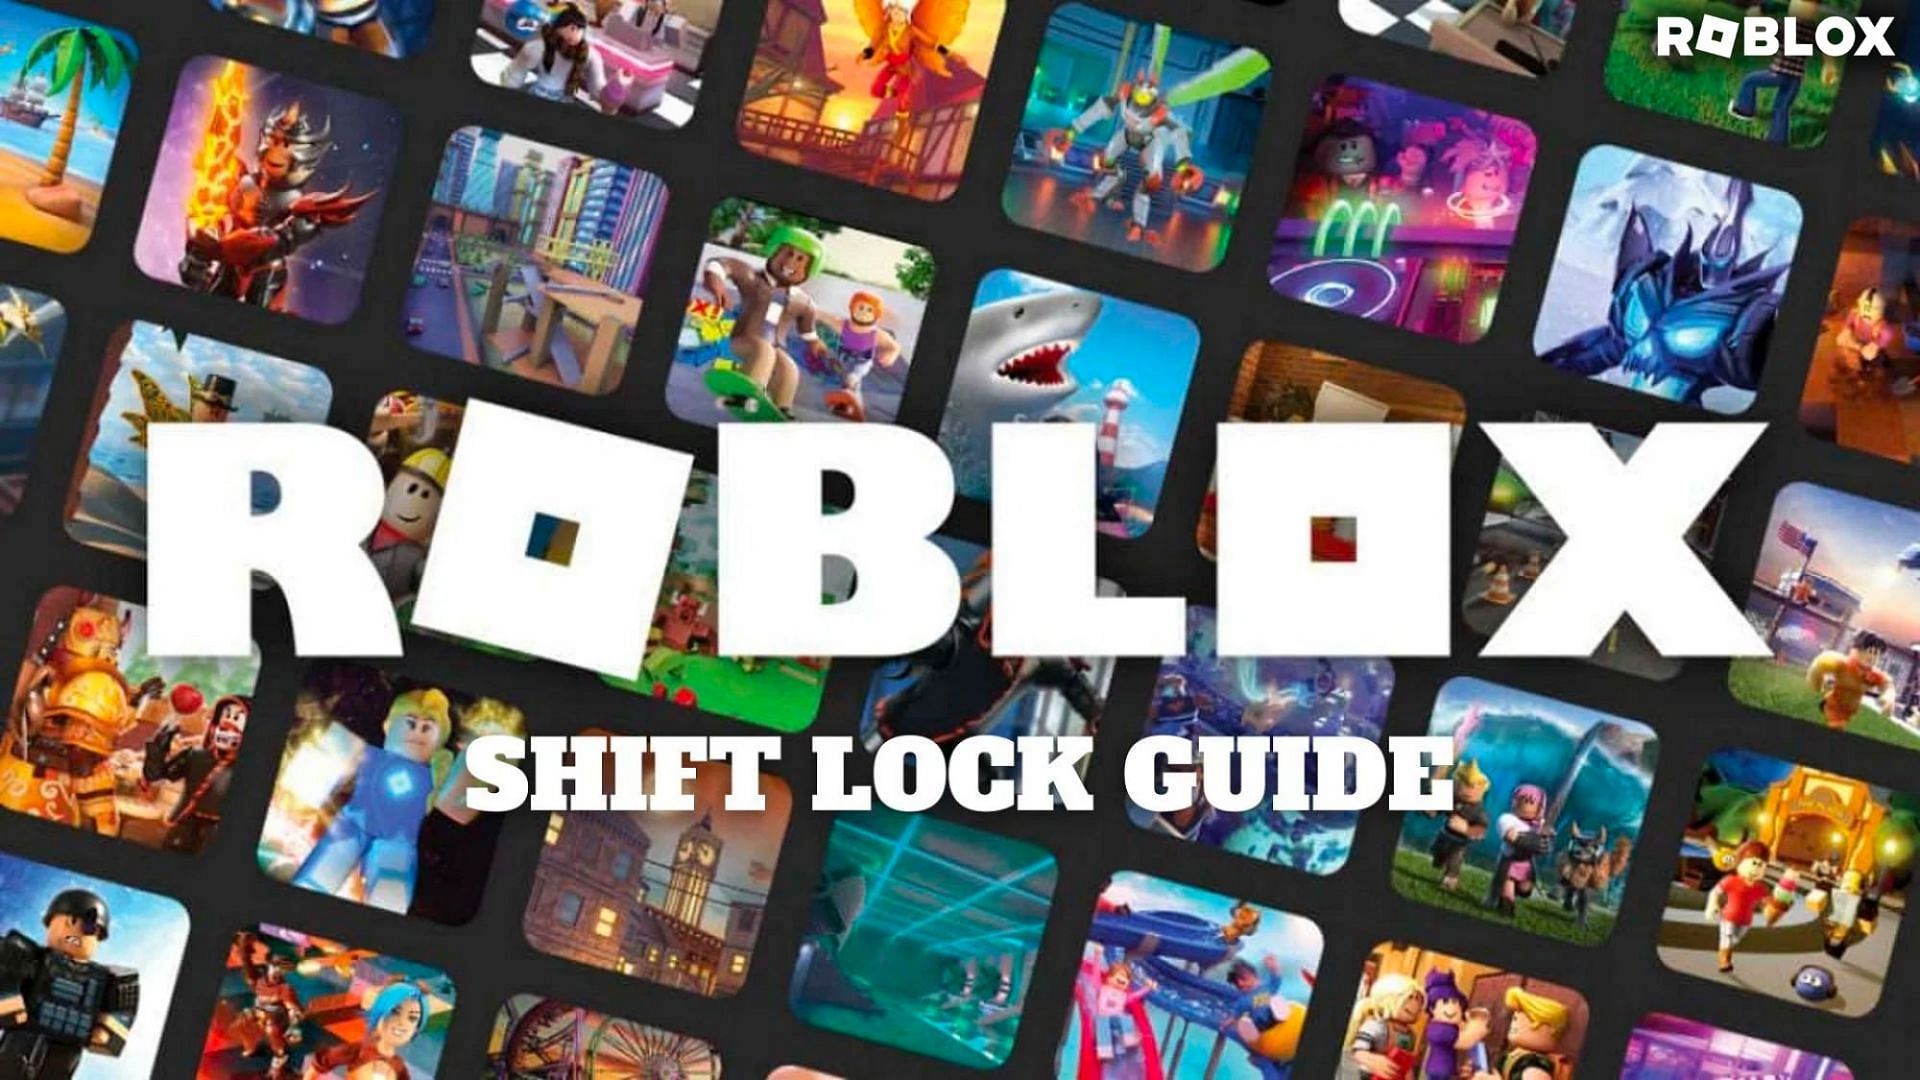 How to turn on shift lock on Roblox